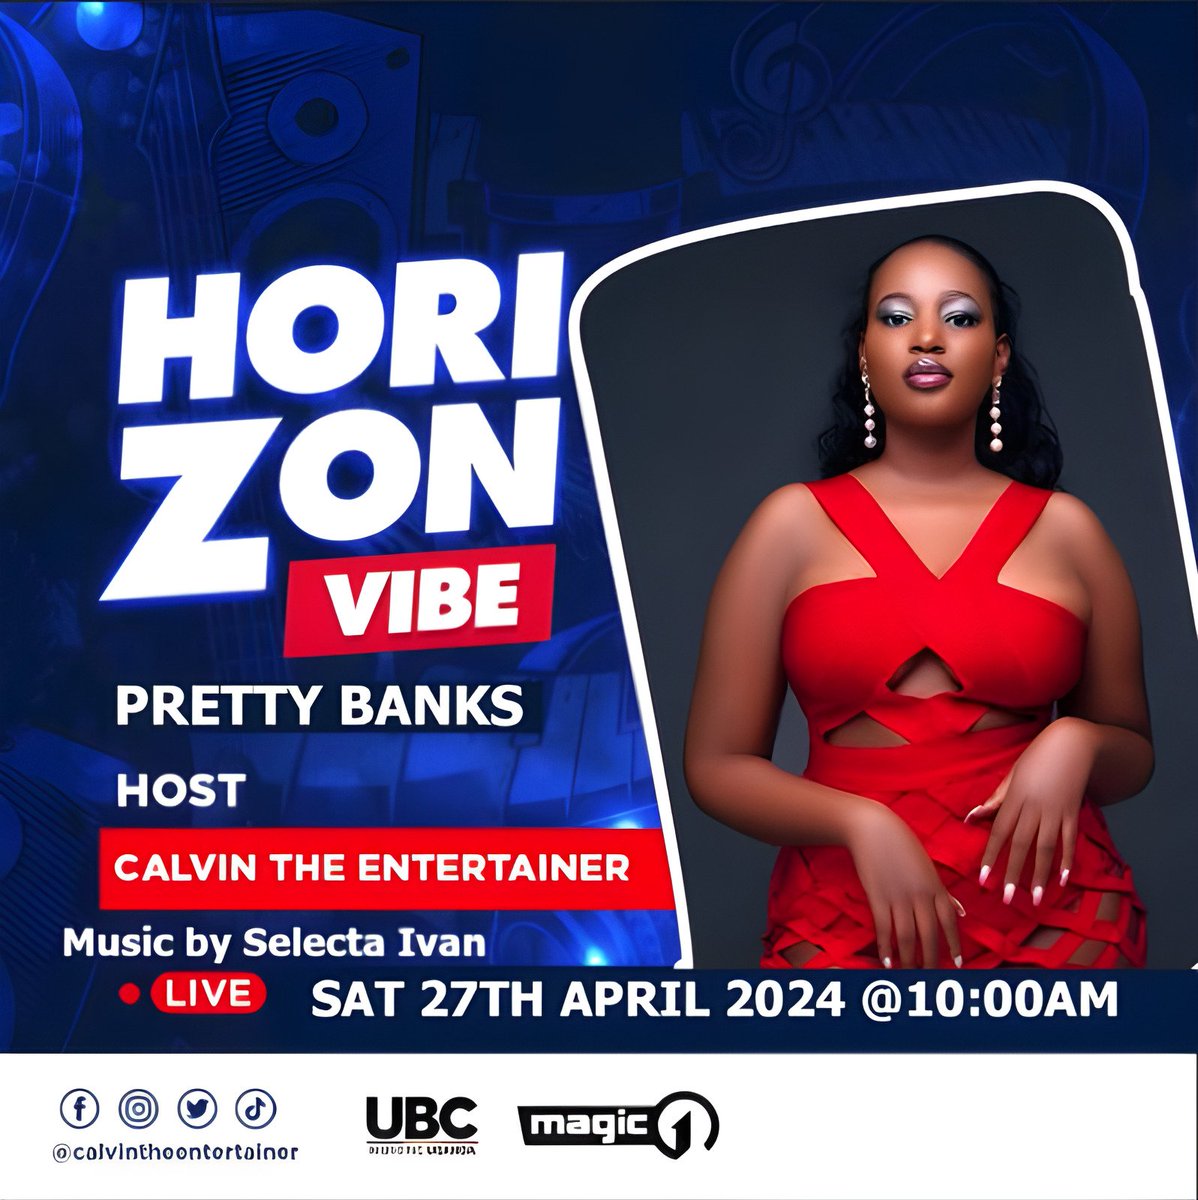 #UbcHorizonvibe: 🕥 10 Am, we're back in another episode, we ready for action with @calvinug. ᵂᵃᵗᶜʰ ᴼᵘᵗ ᶠᵒʳ: Brian Avie & Pretty Banks..🔥 🎶 mash-up - @SelectorIvan11 Catch Up: UBC TV x MAGIC 1 TV